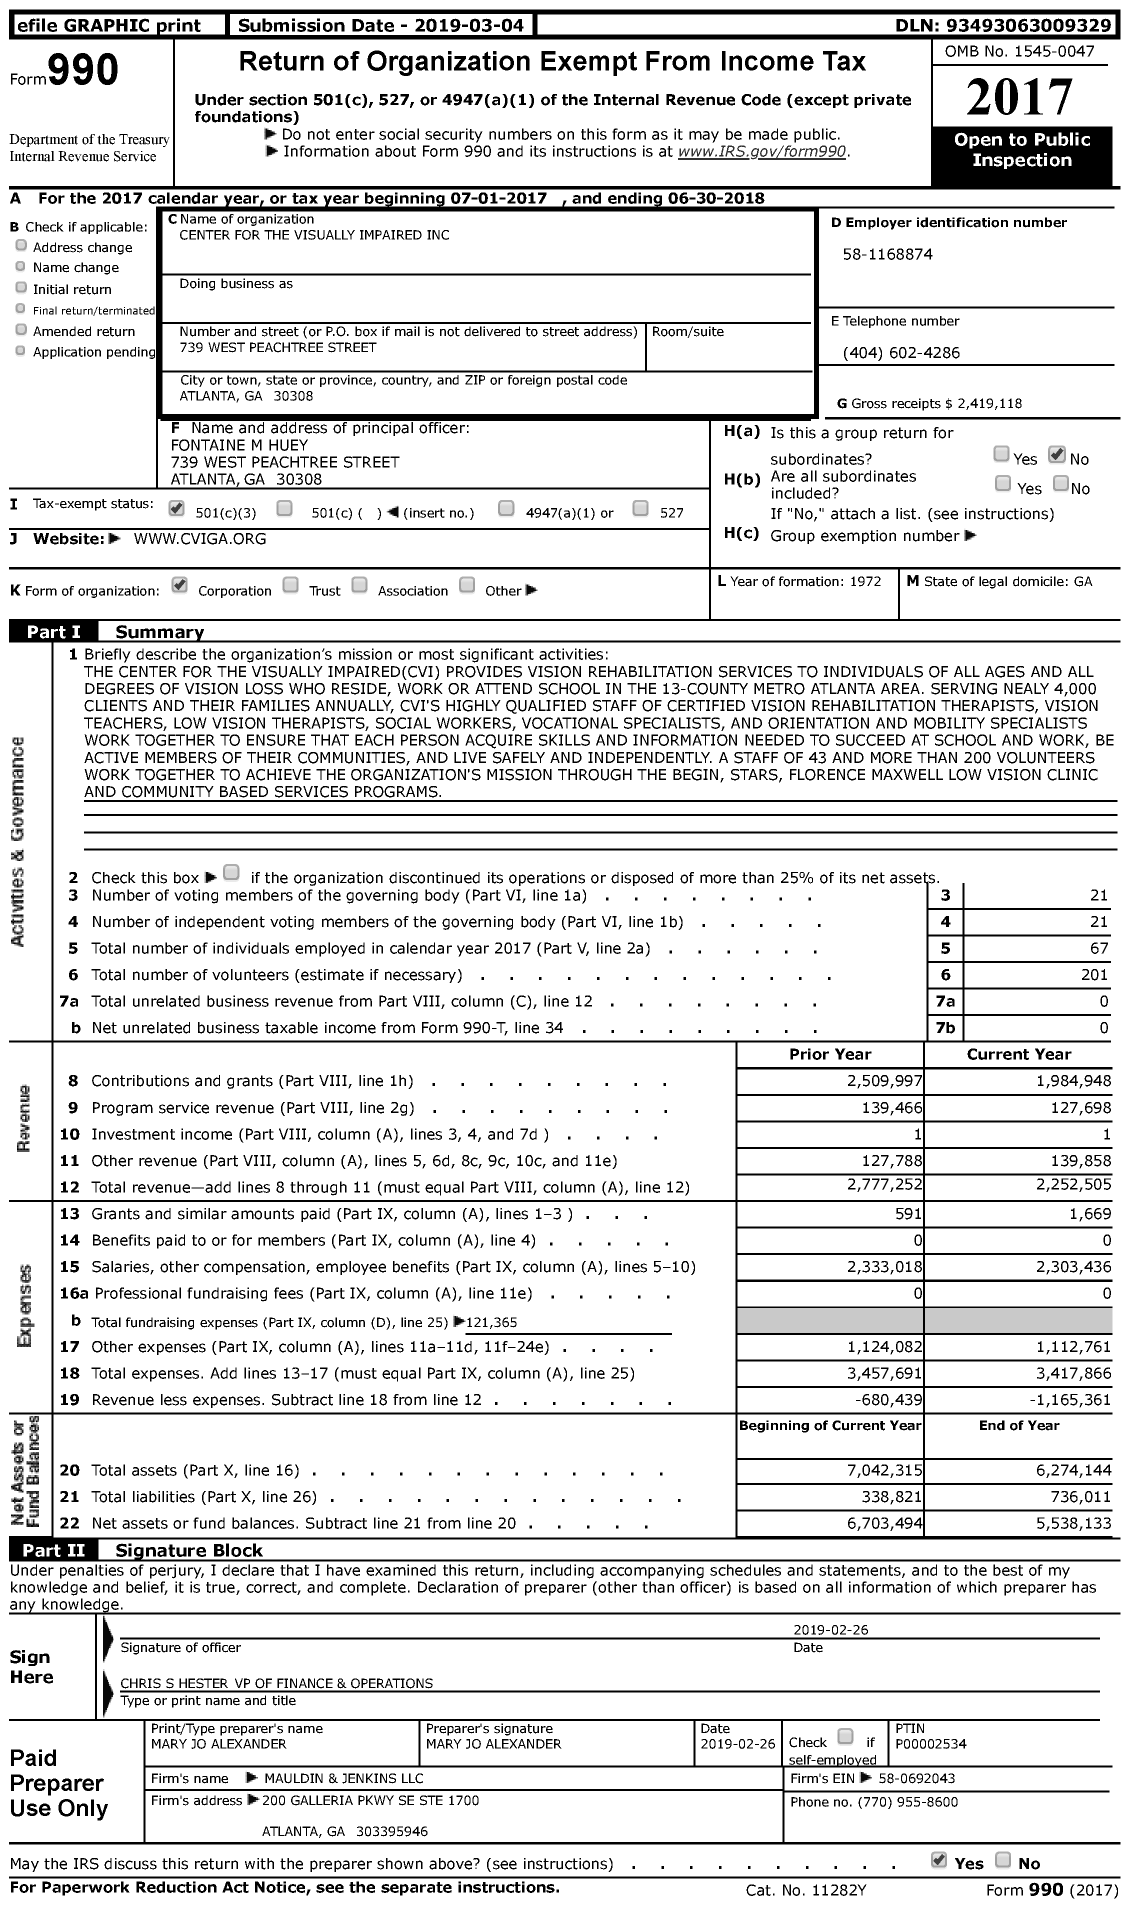 Image of first page of 2017 Form 990 for Center for the Visually Impaired